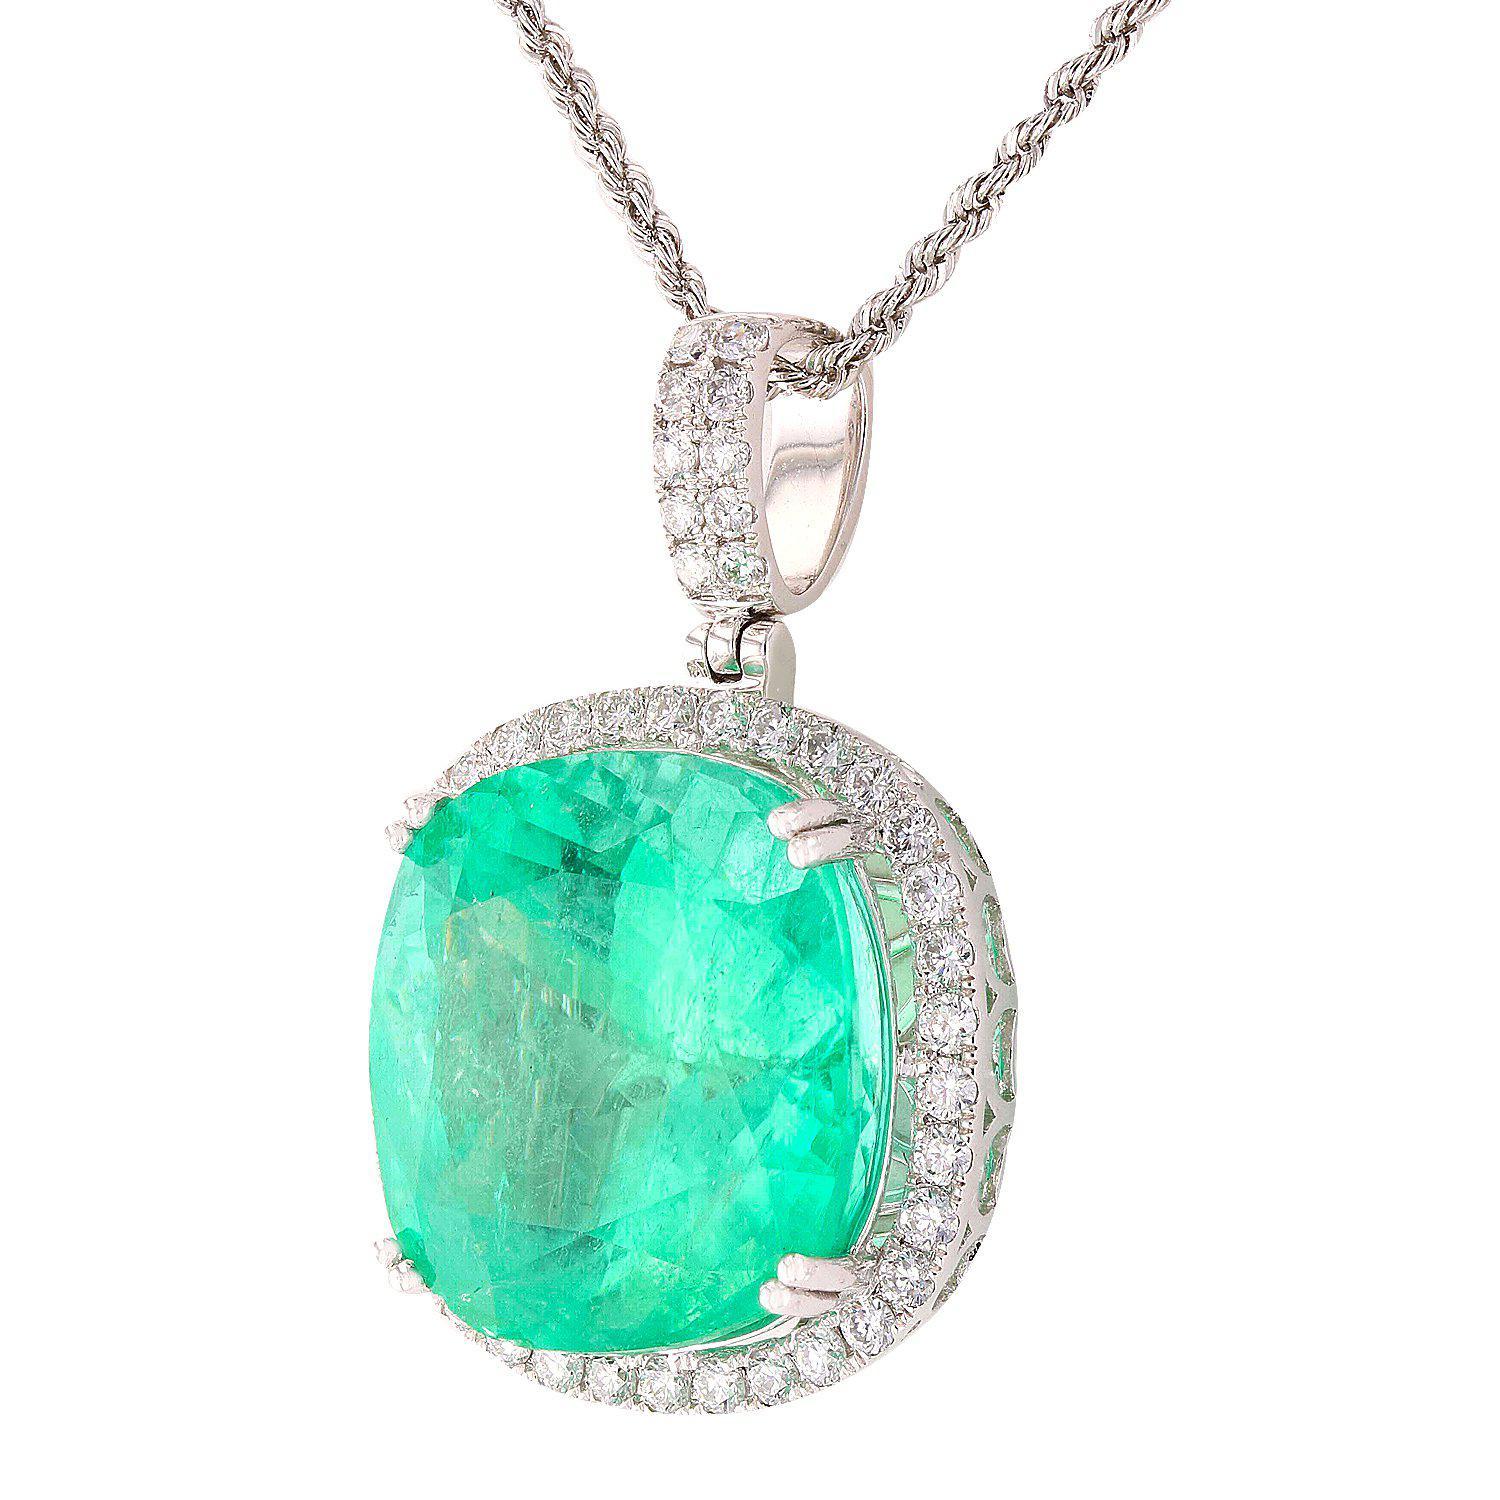 One electronically tested platinum ladies cast & assembled emerald and diamond pendant with chain. The pendant features an emerald set within a diamond bezel and elaborate lattice under gallery, completed by a diamond set bail. The pendant is